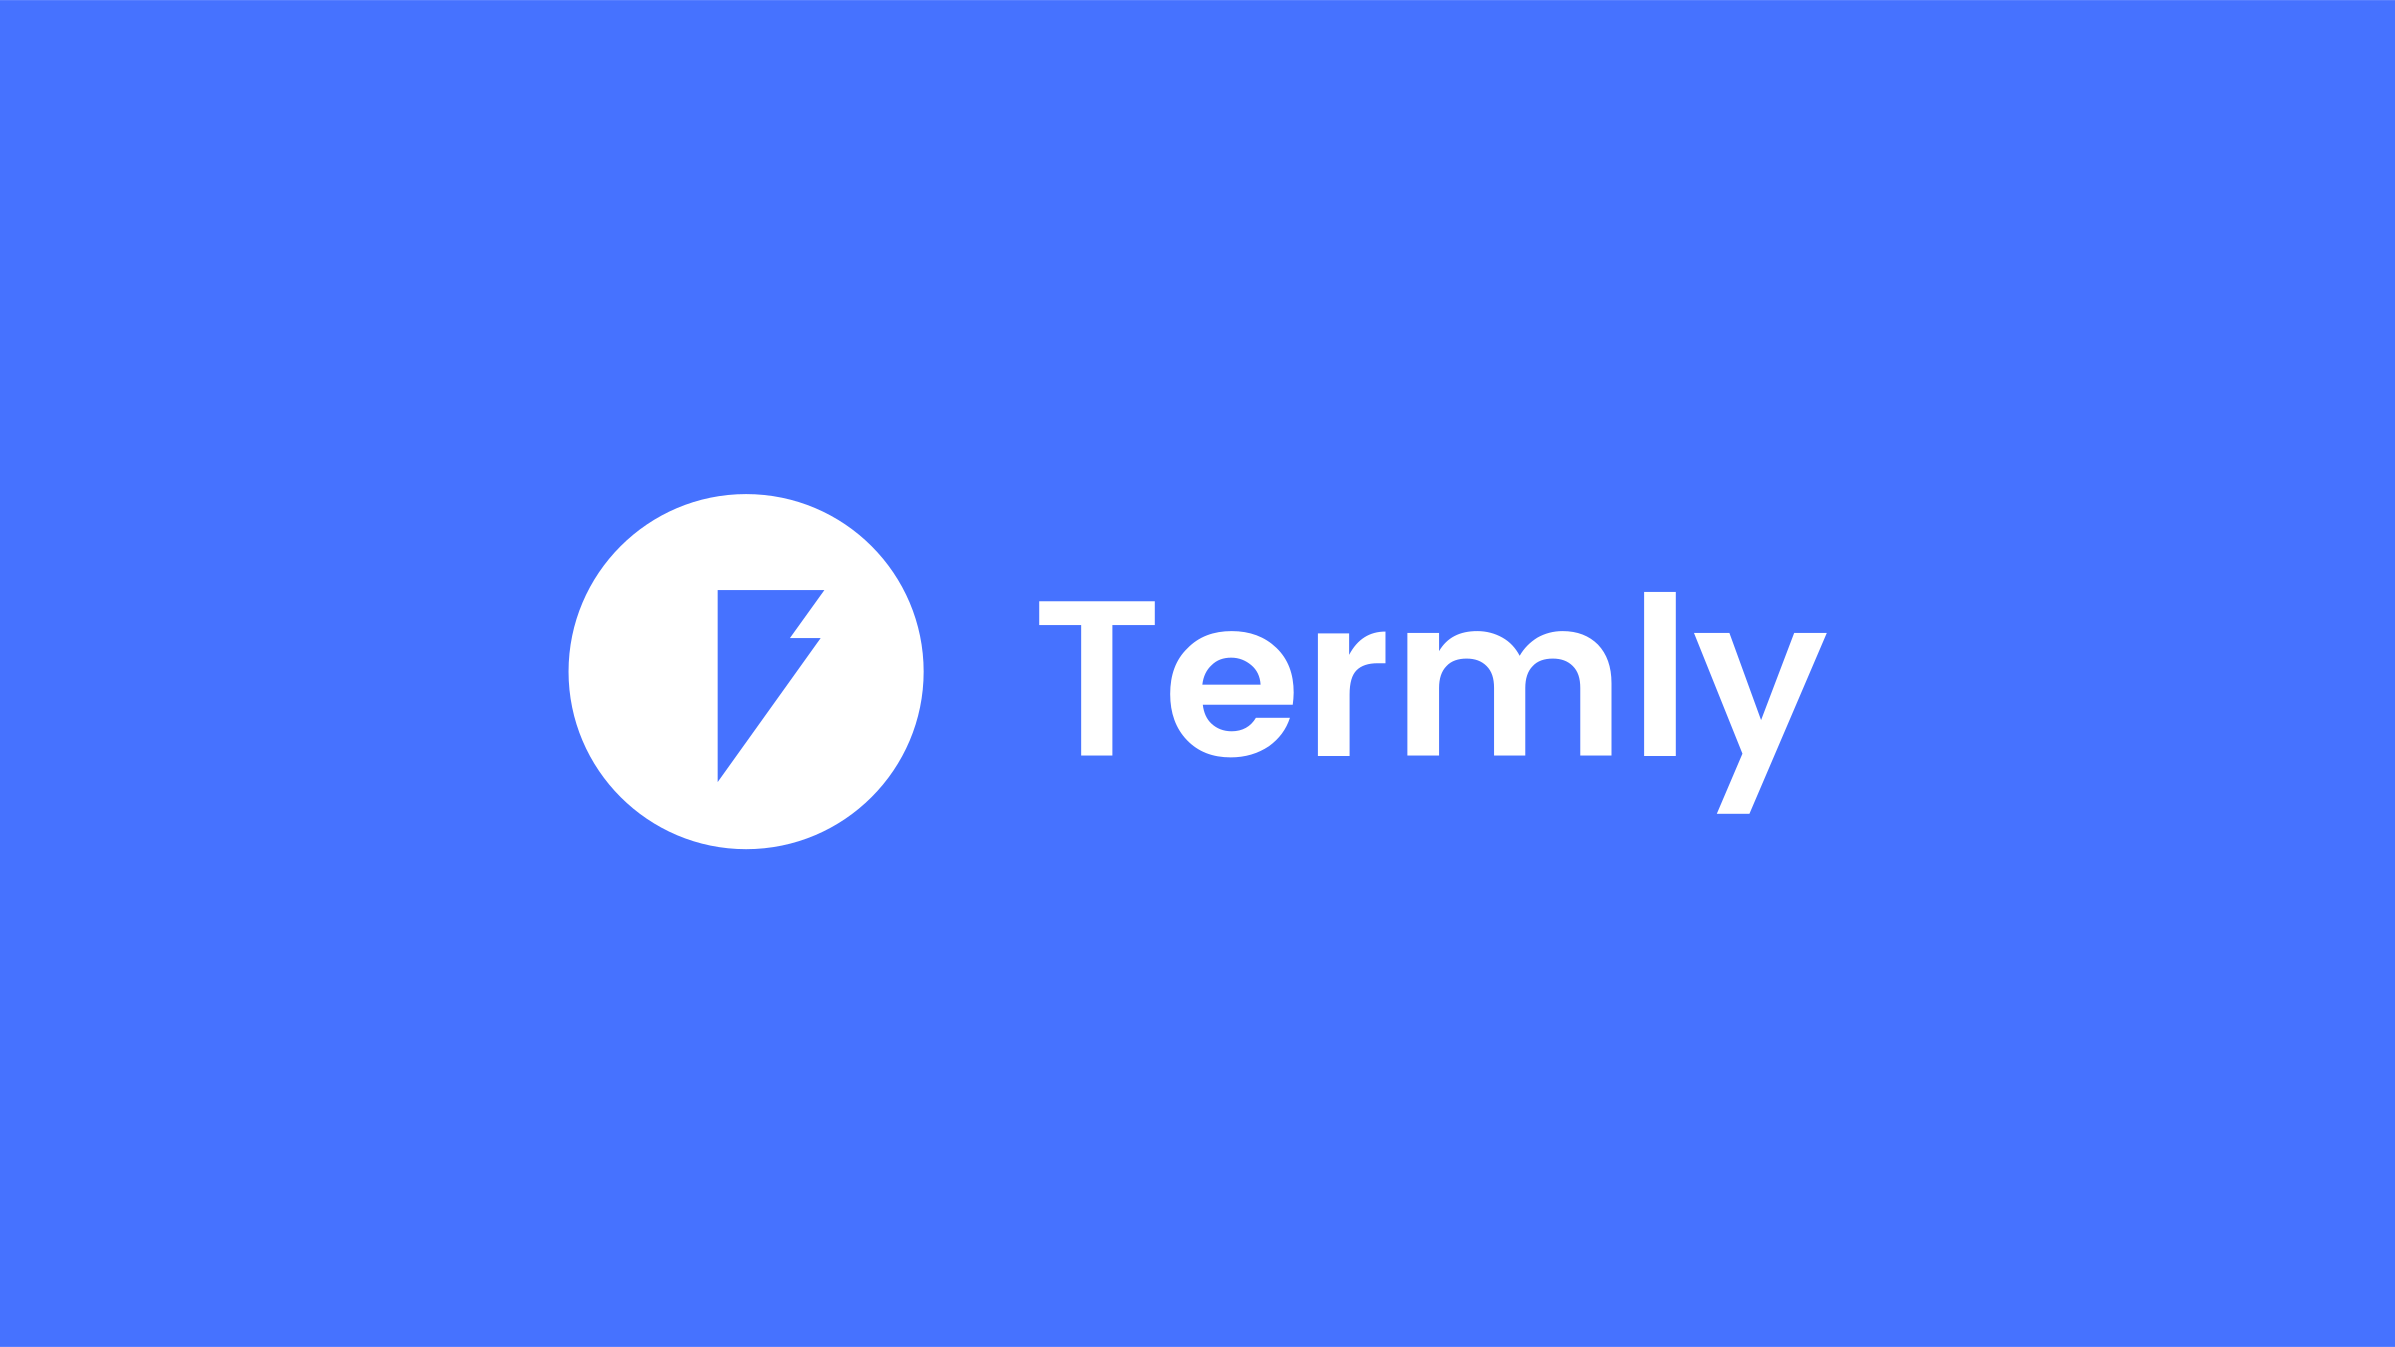 Termly Responds to Feedback, Updates Its Cookie Consent Banner Limits